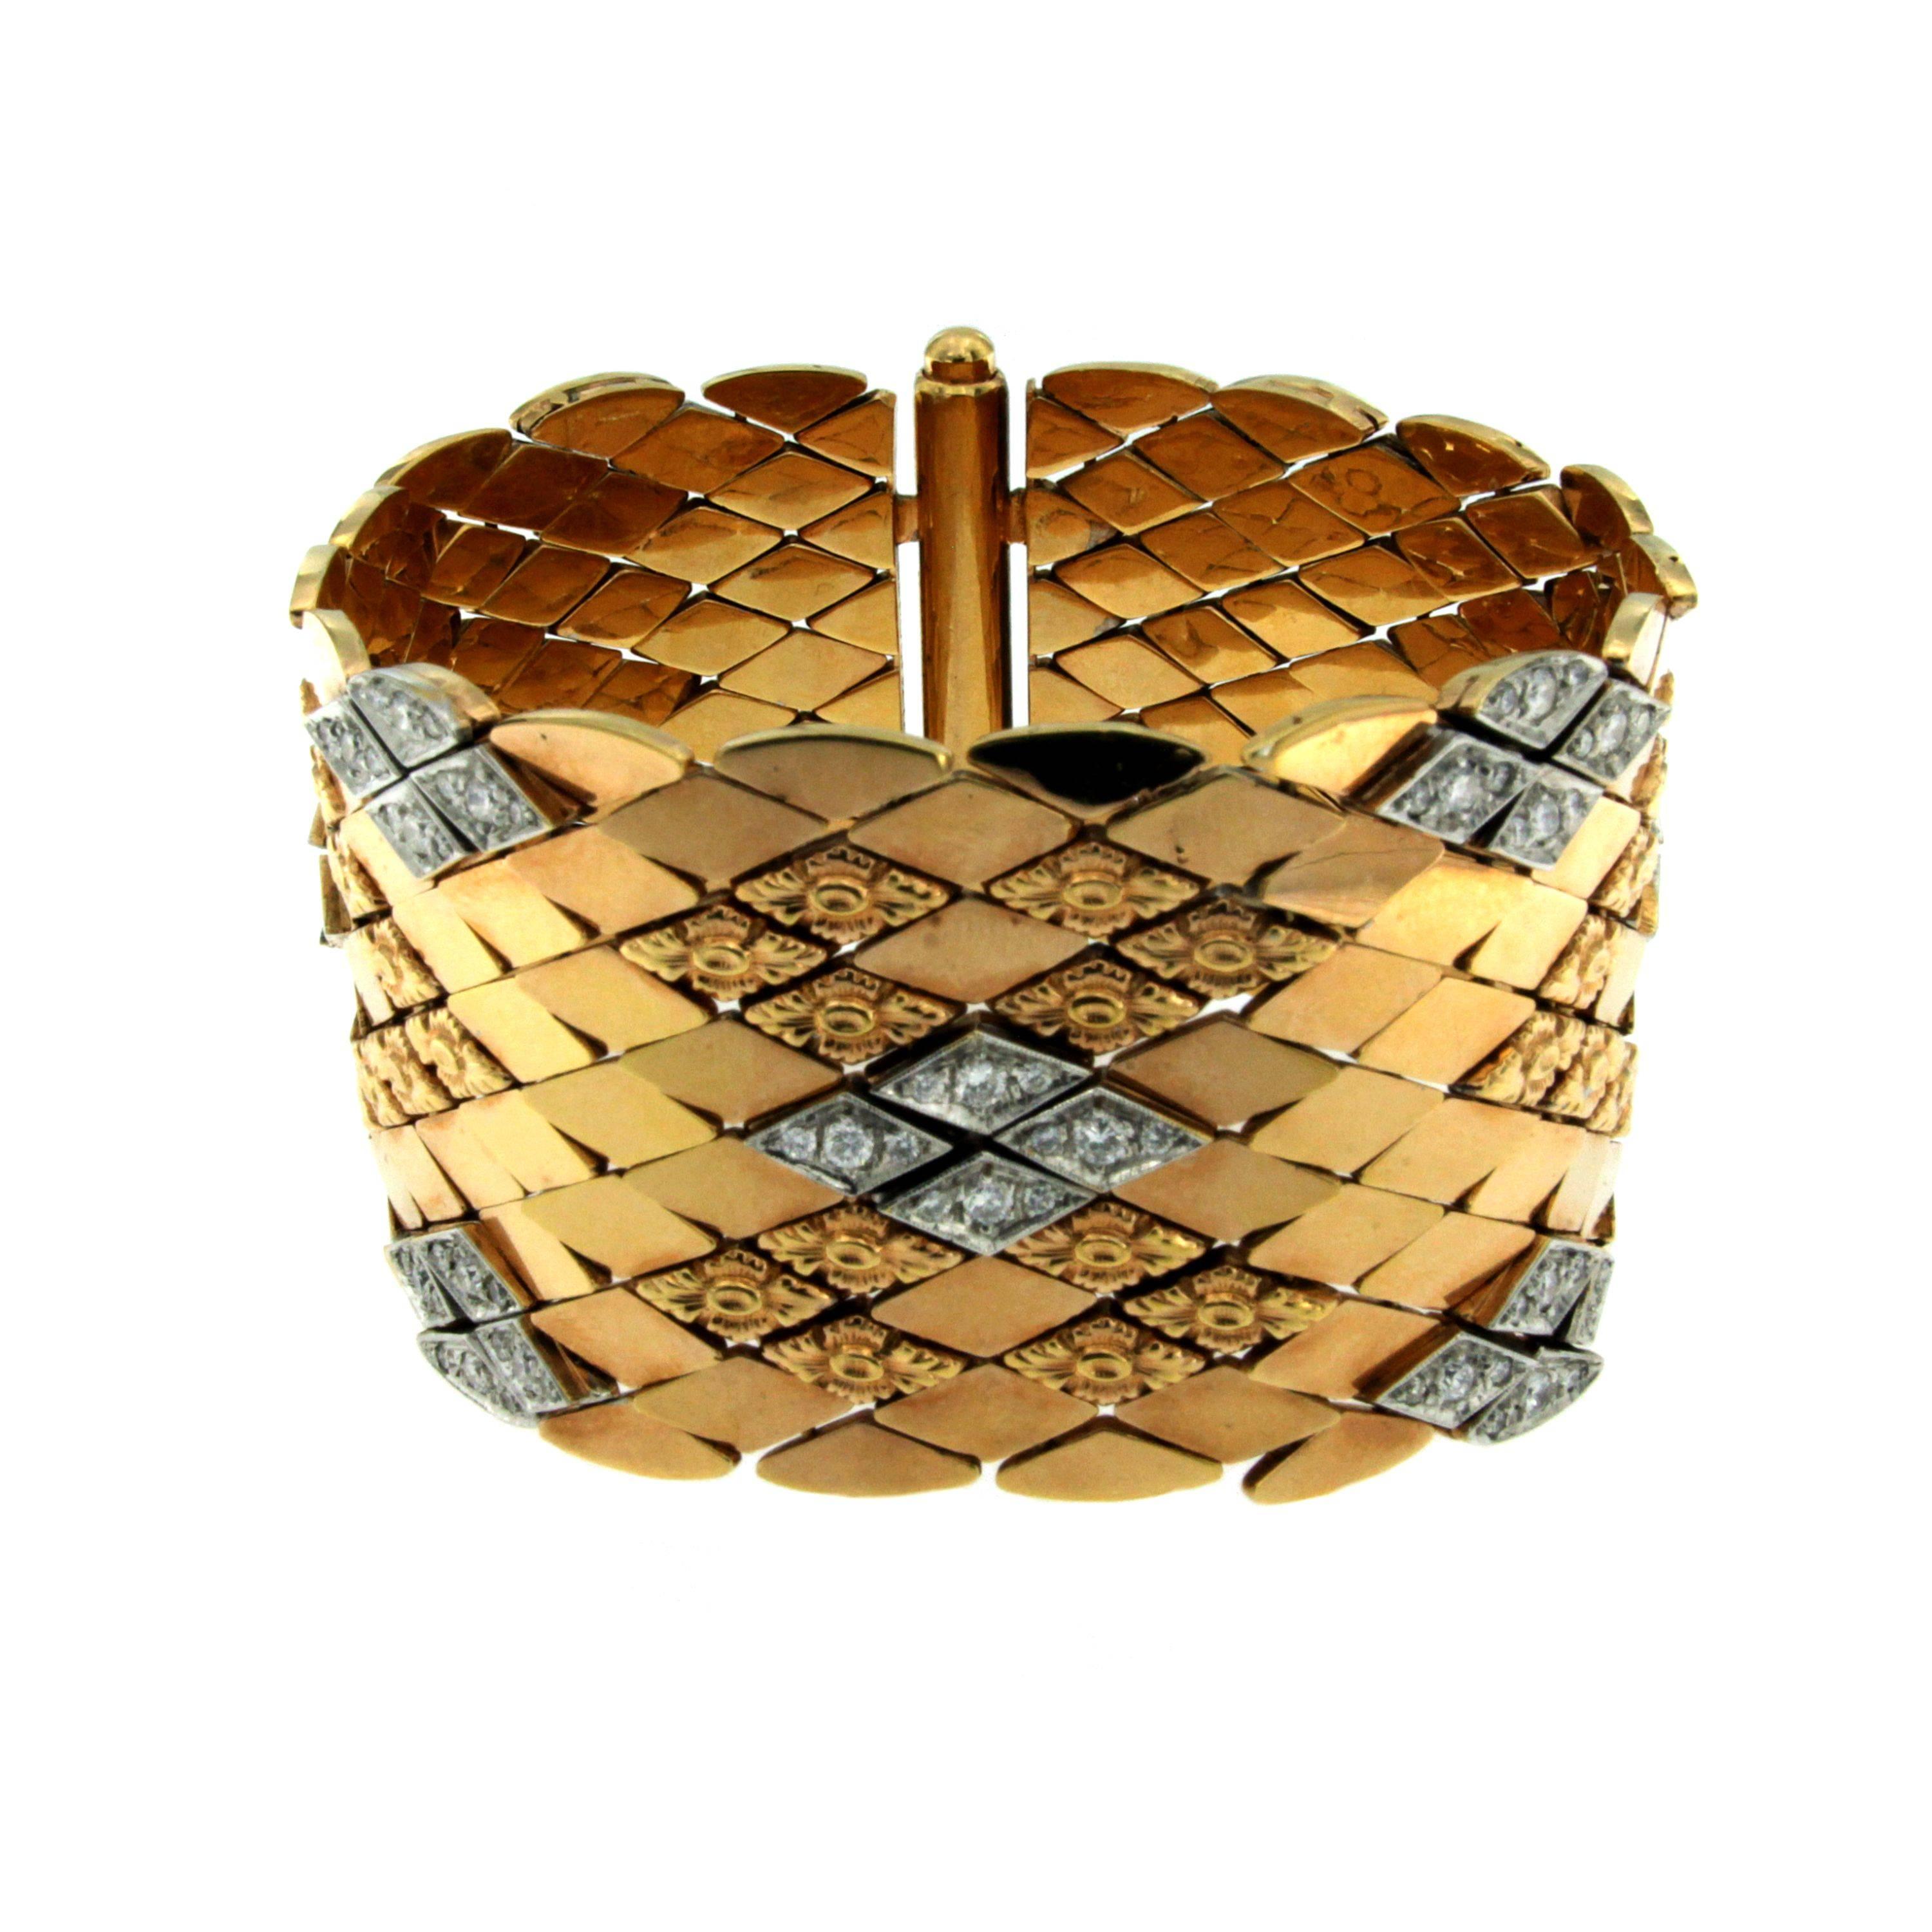 A Stunning bracelet, all handmade in solid 18k yellow gold (marked 750) Made in Italy marked 17VI circa 1940'
It is in excellent condition, you can immediately see the indistinguishable design of Retro era.

The bracelet is set in rhombus motif